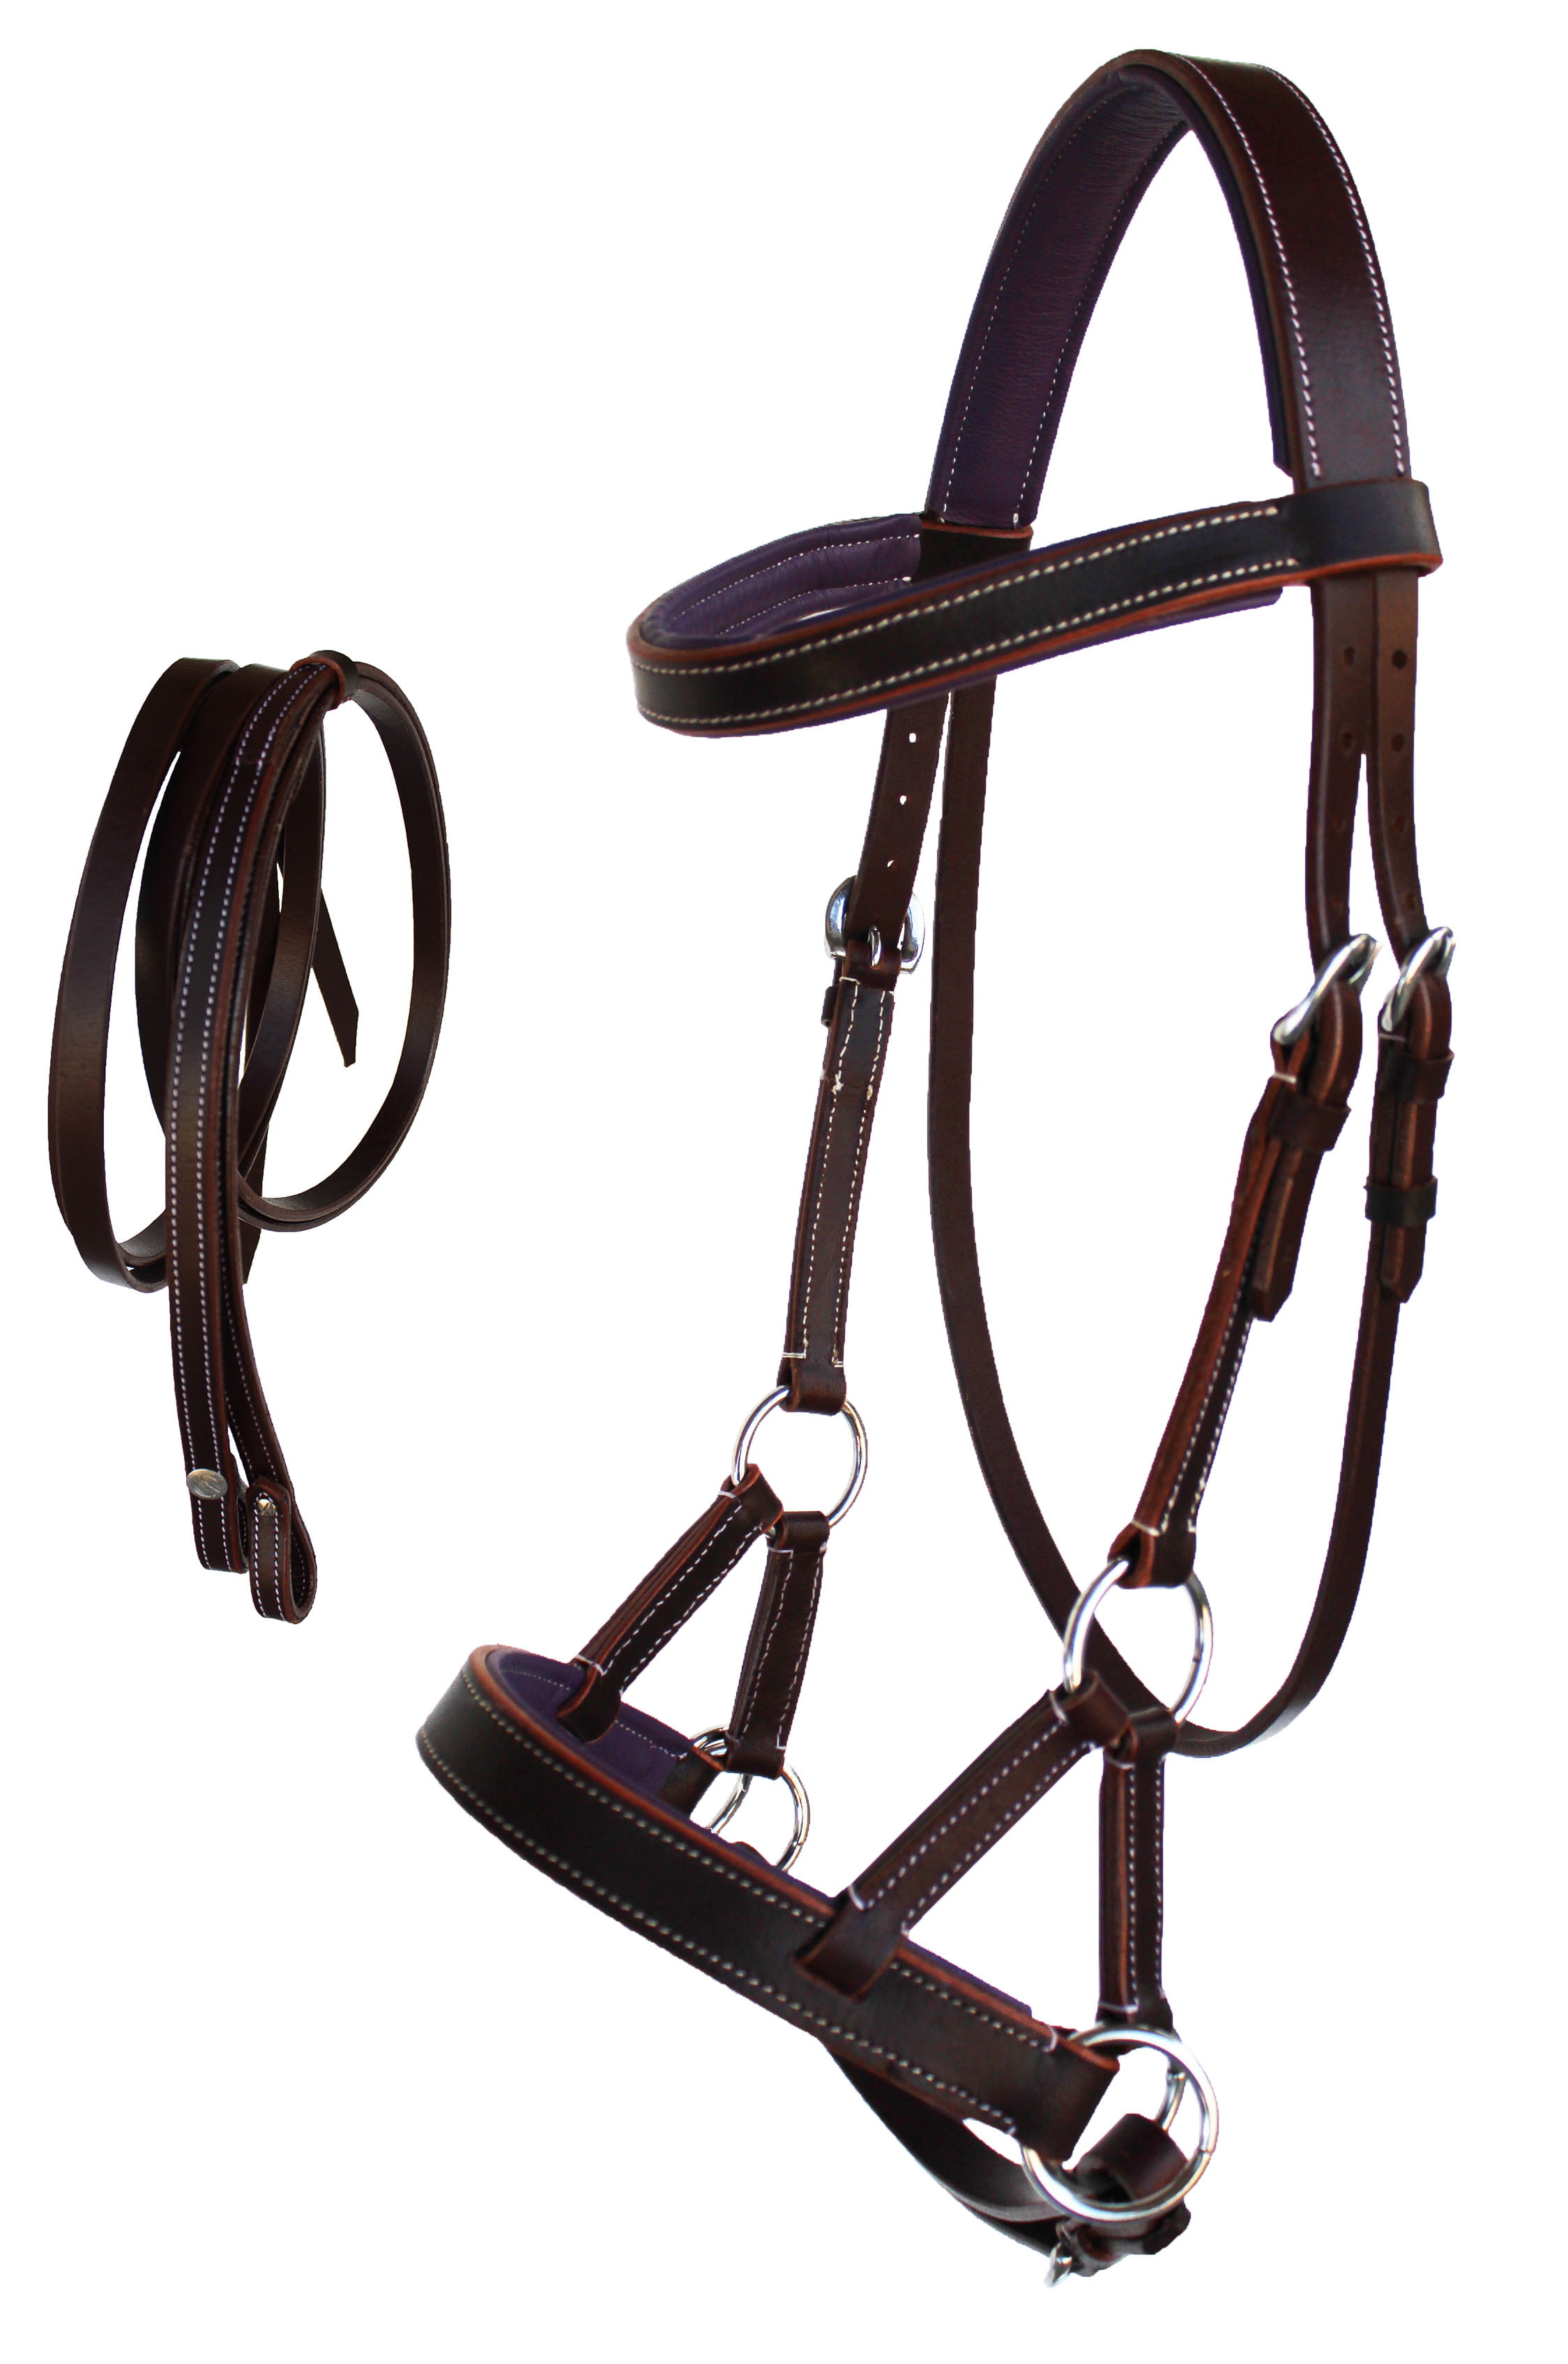 Brown Cross Over Bitless Bridles with designer Chain on U browband Grip Reins 